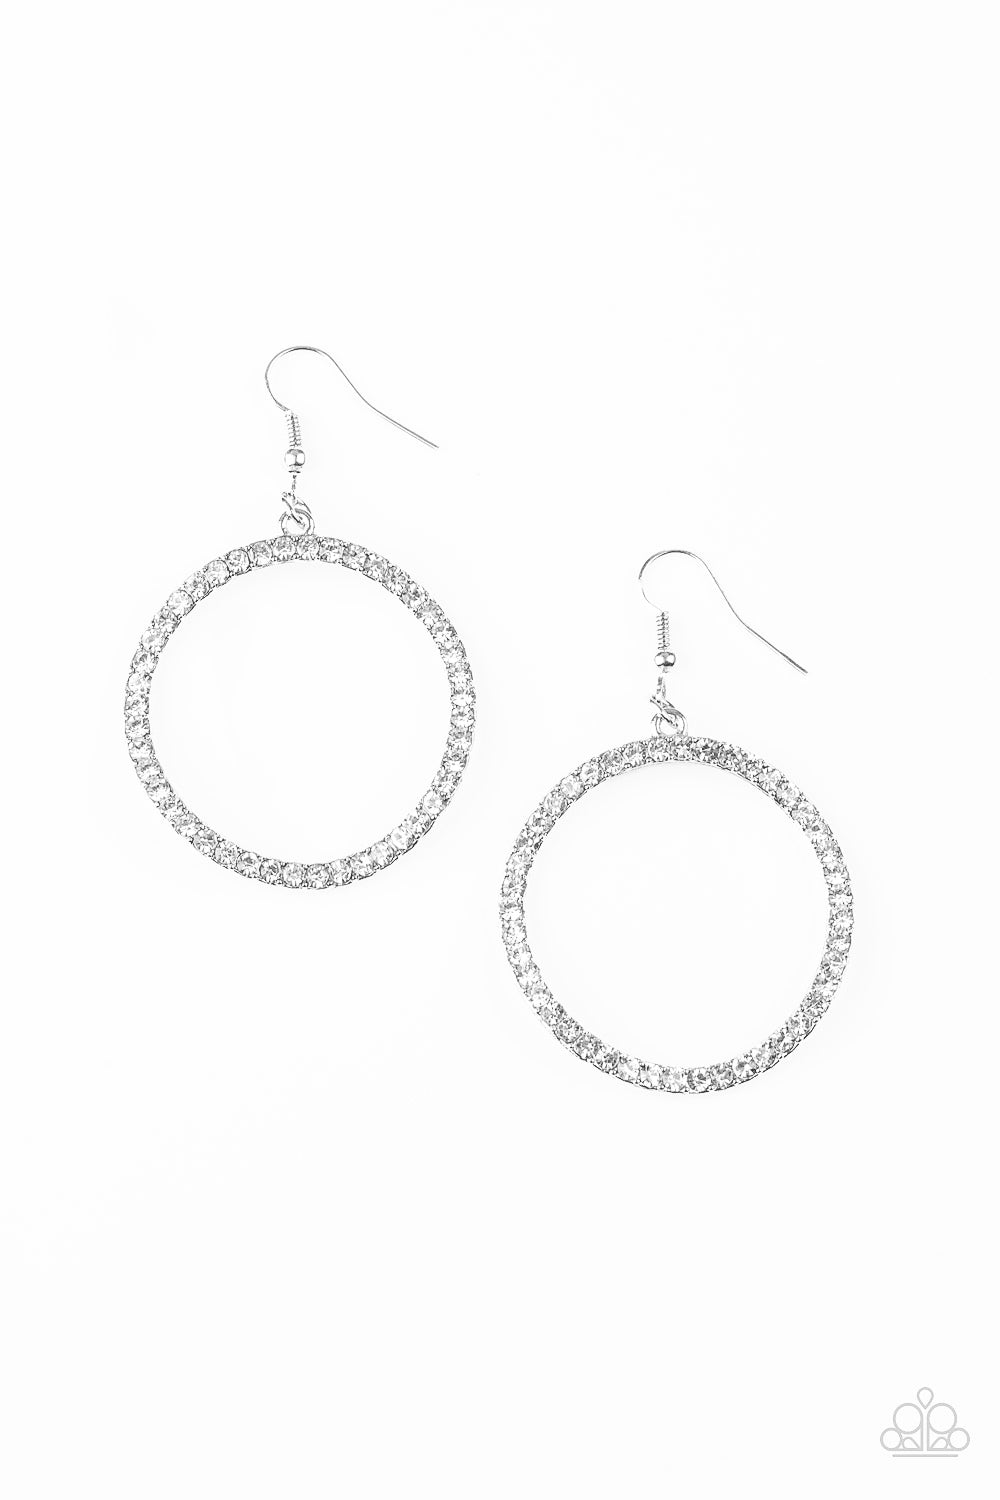 Paparazzi Accessories Stoppin Traffic White Earrings - Lady T Accessories